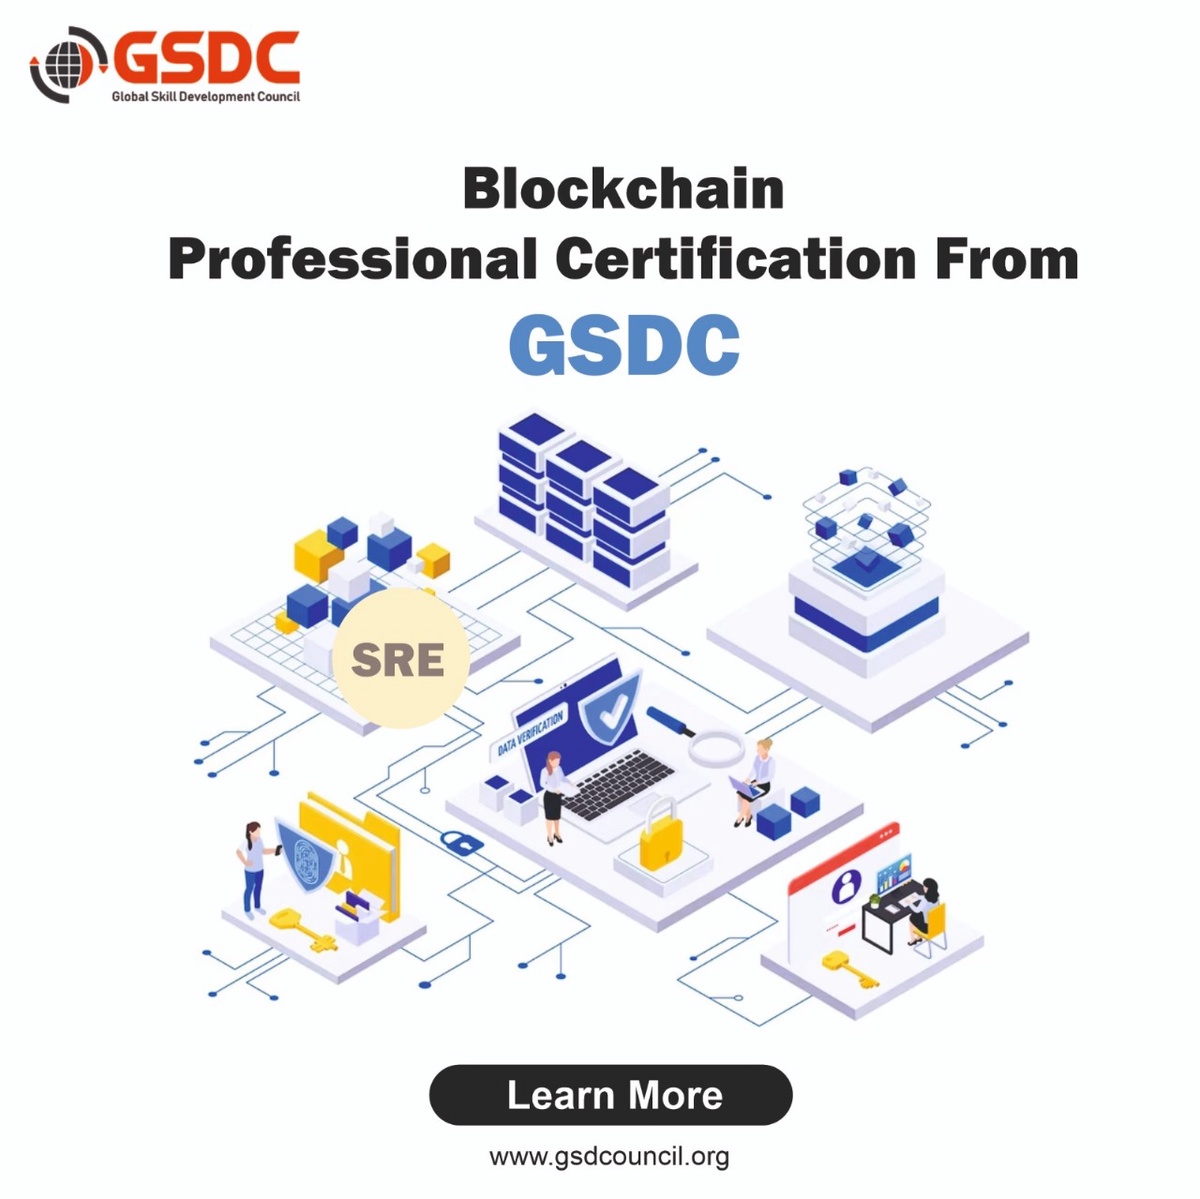 Blockchain Professional Certification from GSDC